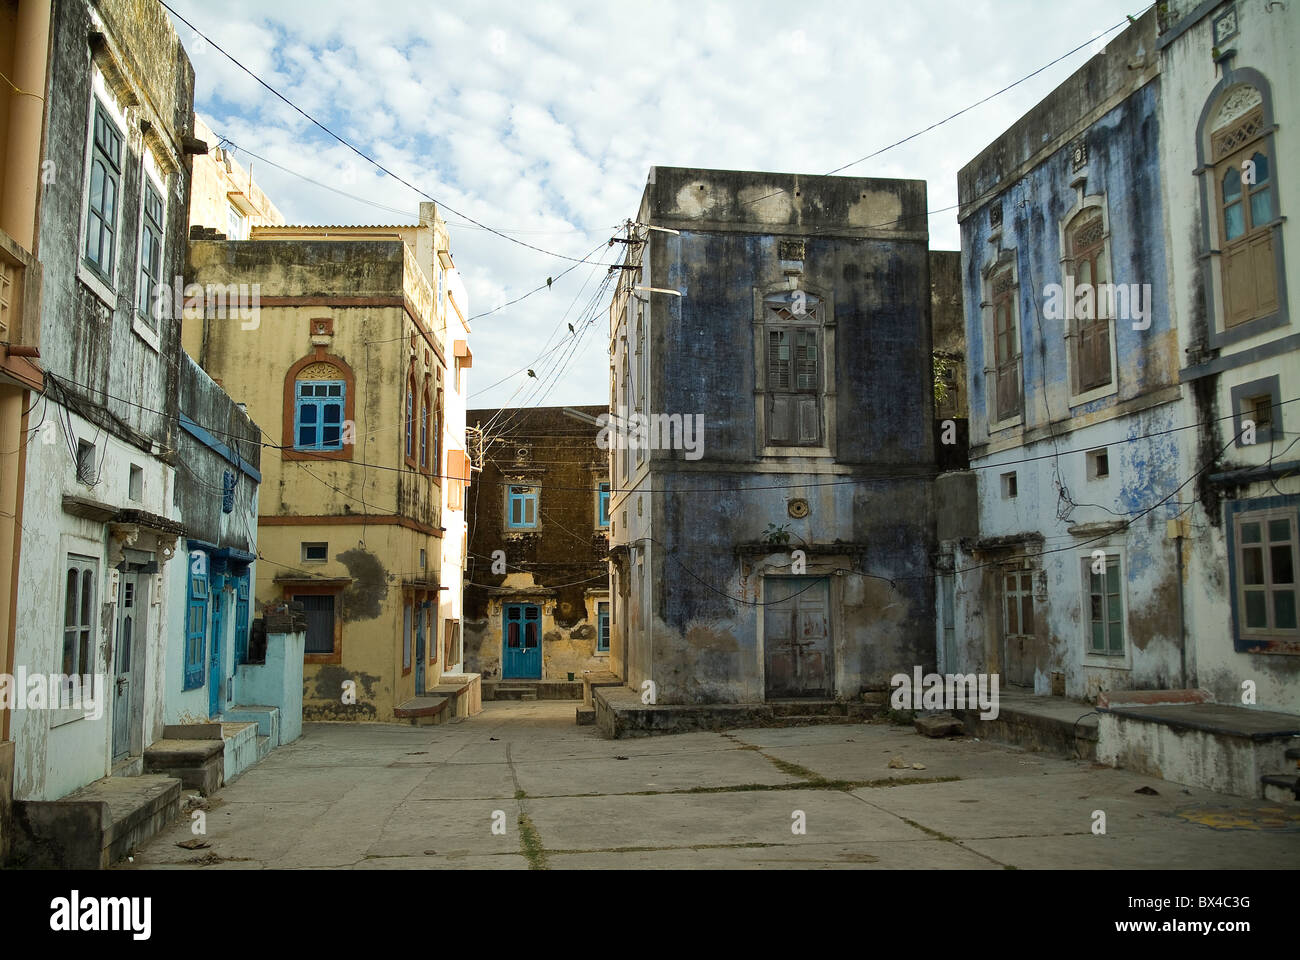 Old Portuguese colonial buildings on the Island of Diu, India Stock Photo